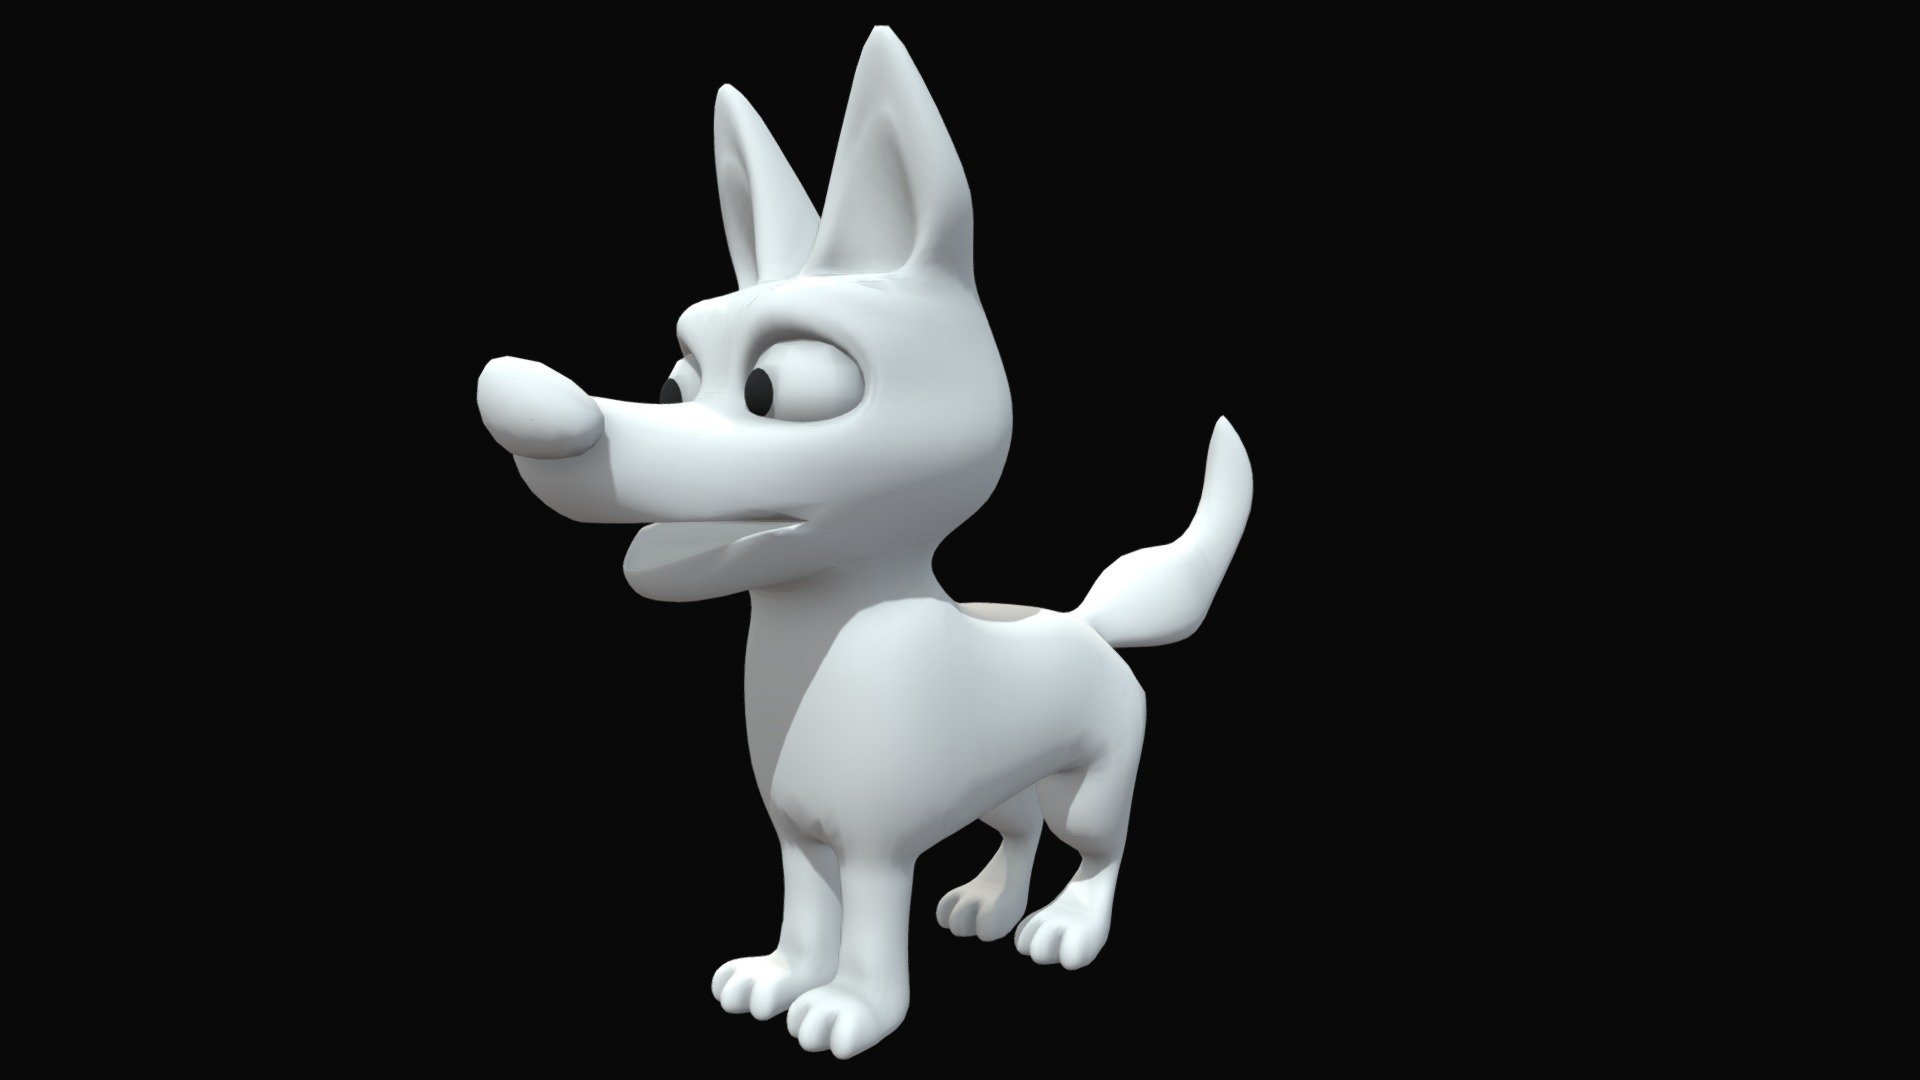 Cartoony dog modeled in Cinema 4D as seen on the video on the Tropical Cyborg Youtube channel

https://youtu.be/ZBQllKMrLMs - Foxy - Cartoony dog modeled in Cinema 4D - Buy Royalty Free 3D model by Tropica Cyborg (@rogerio_lima) 3d model